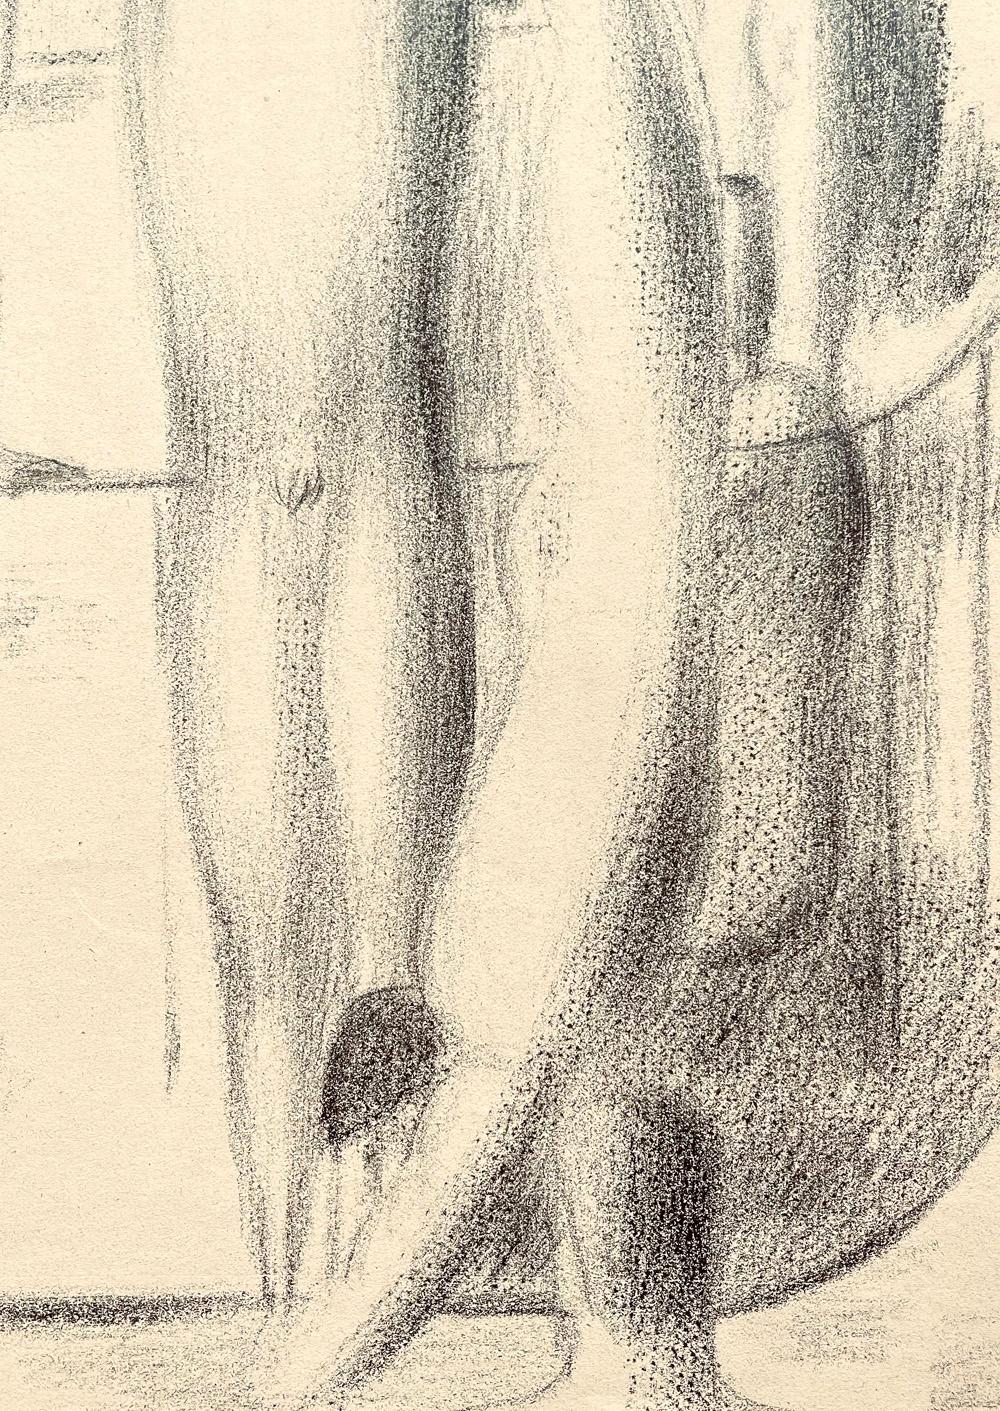 Lovely and atmospheric, this drawing of a series of male nude figures at the swimming pool -- one diving, one readying to dive, others at the mirror or quietly observing -- was created by Walter Wörn in the late 1940s. The artist was fascinated with